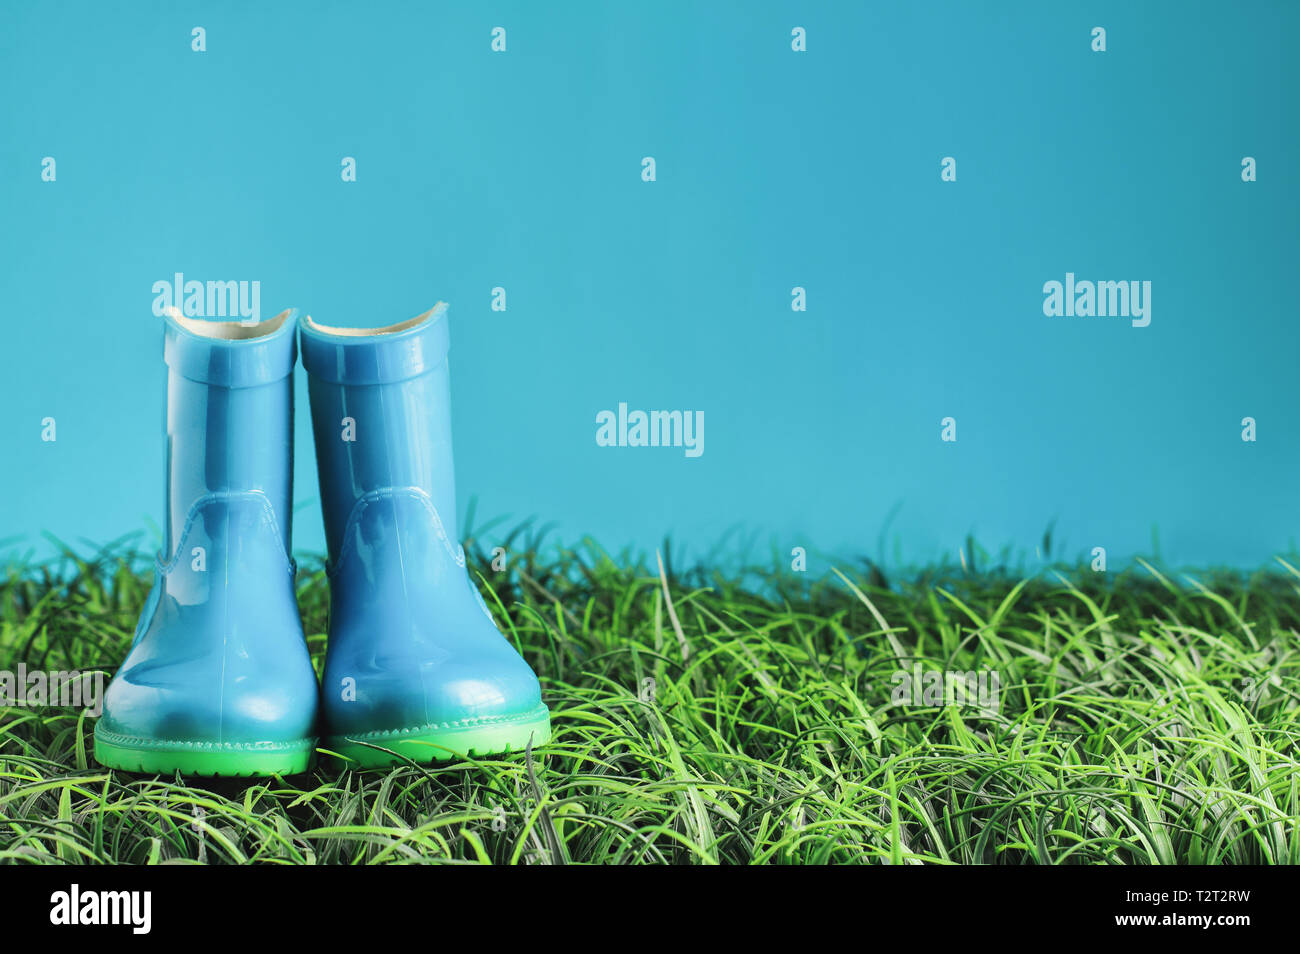 Blue children's rain boots / wellies sitting in the grasss agaisnt a blue background with room for copy space. Stock Photo